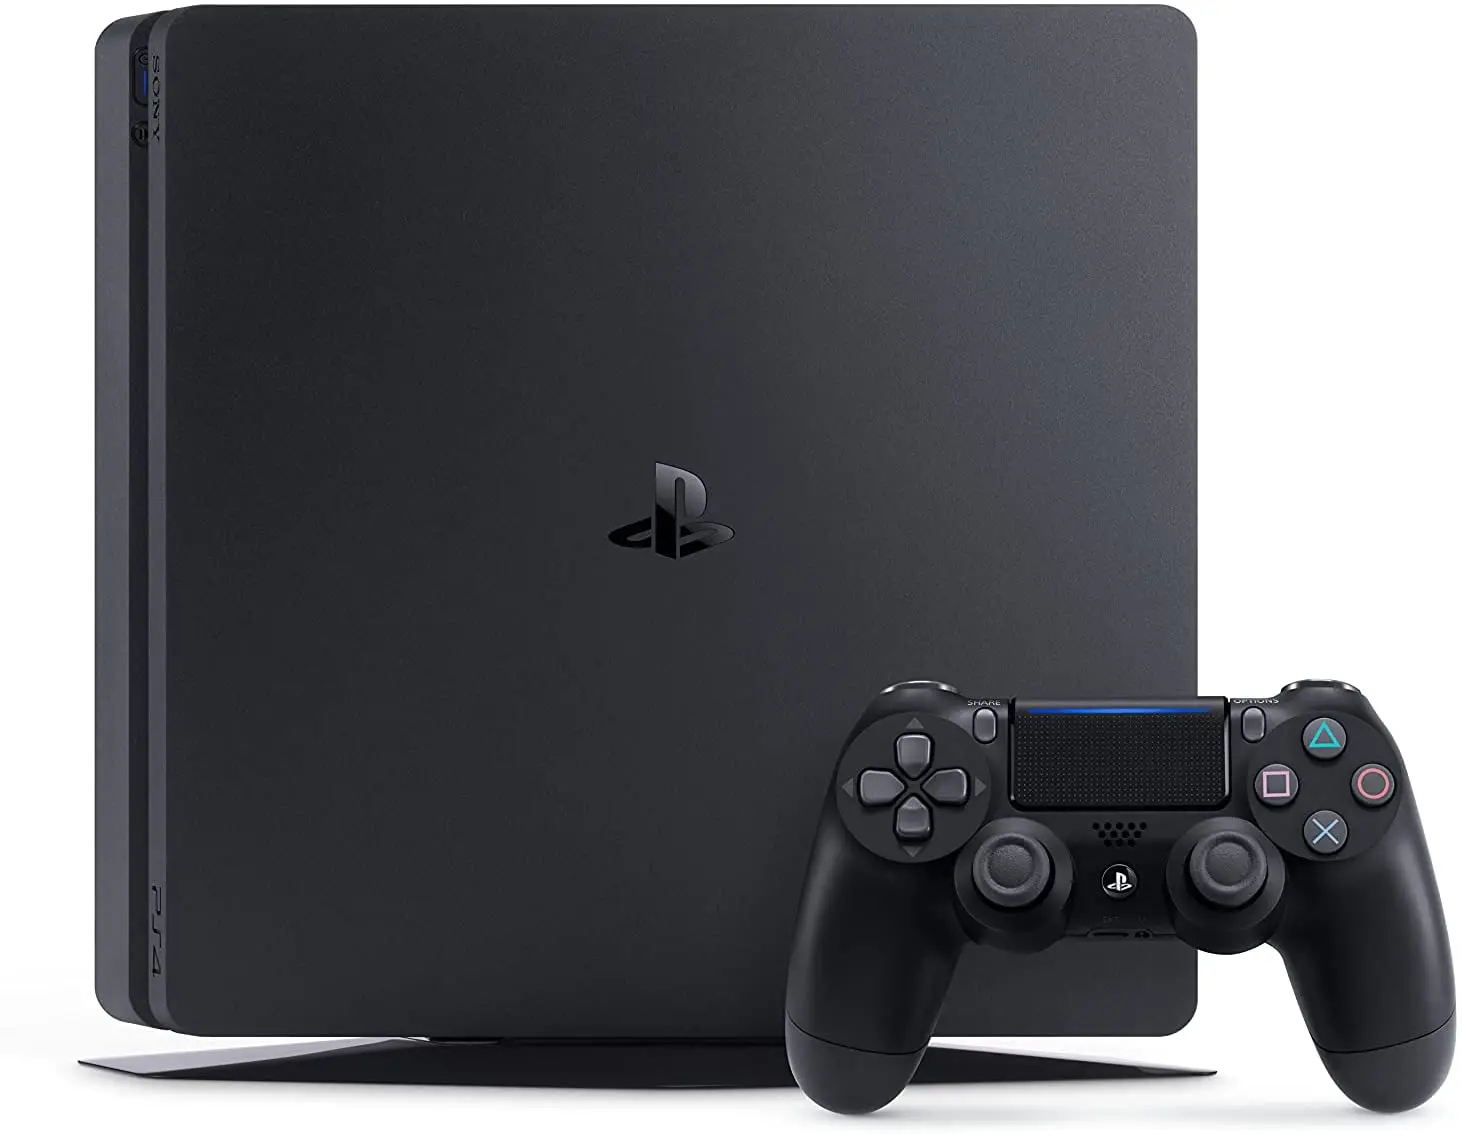 

Playstation 4 PS4 Slim 1 TB, 1 Handle, 1 Console, TV, music and More Vivid HDR Gaming, PS4 Slim, 1 TB Disk, PC,TV for Use,